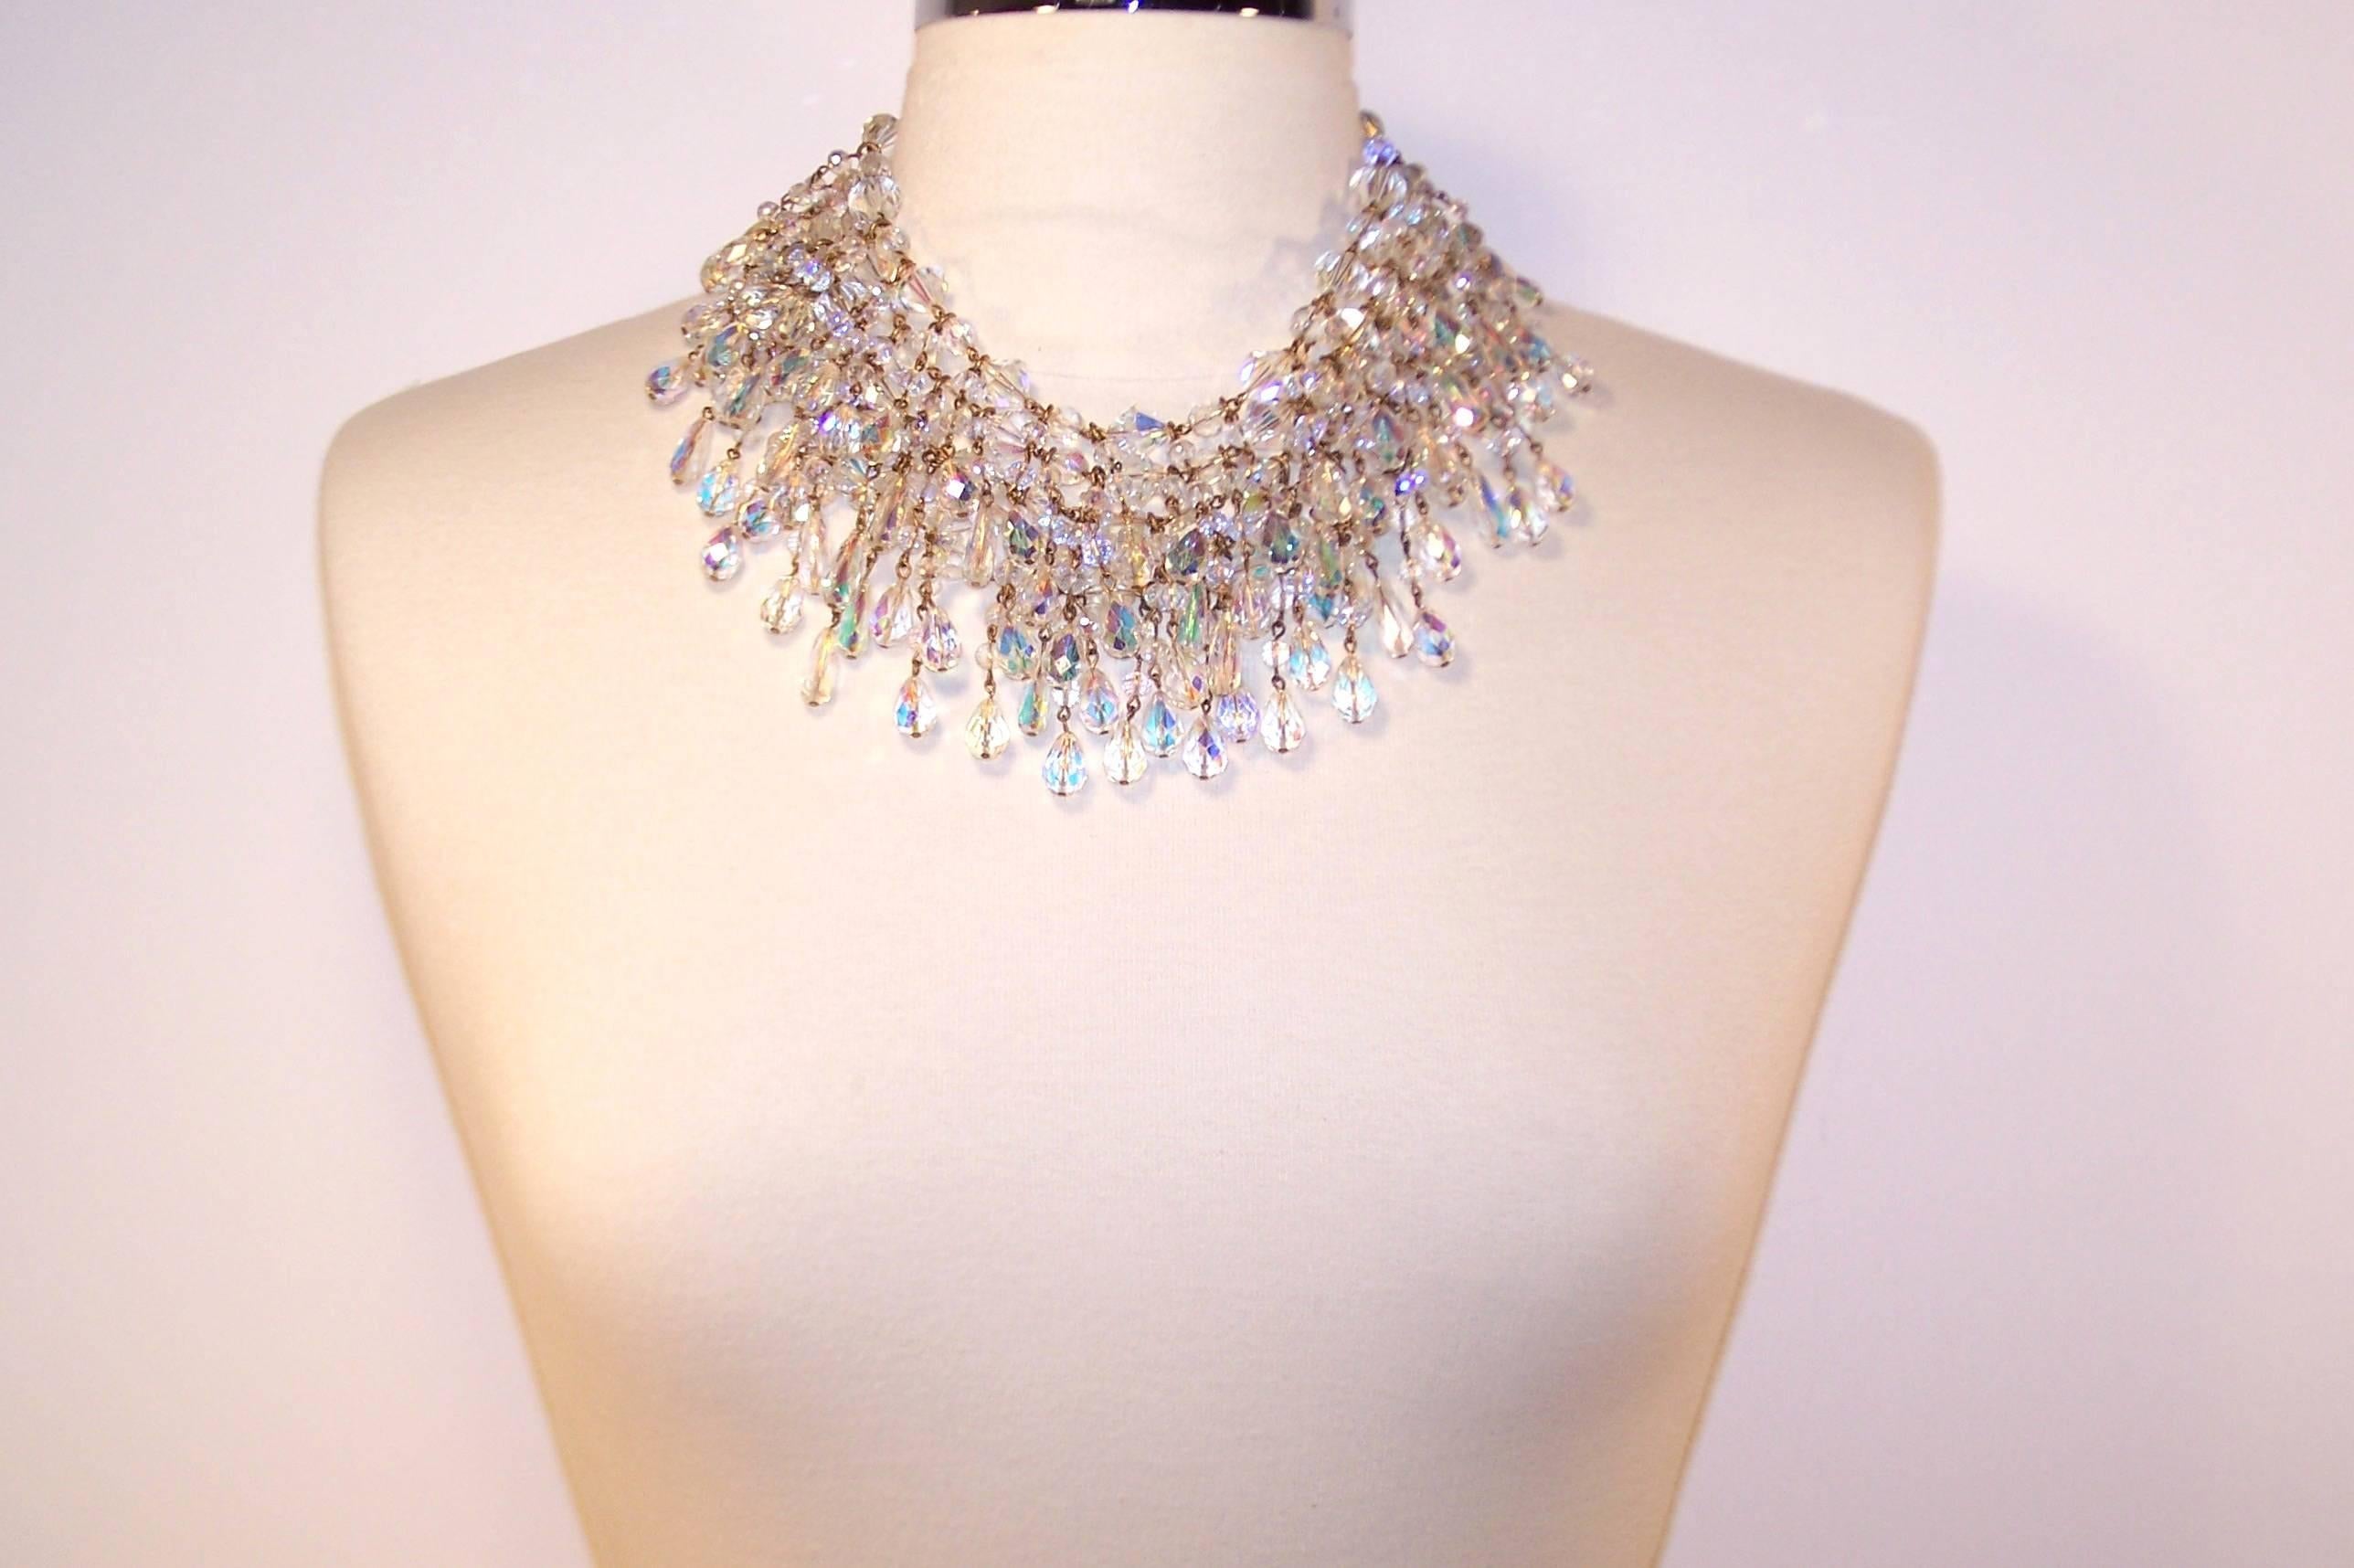 Stunning!  Wear the stars at your neck with this five strand faceted crystal necklace.  Each crystal emits an iridescent  blue and pink sheen which lightens everything around it.  Though the necklace is unsigned, it is high quality and well